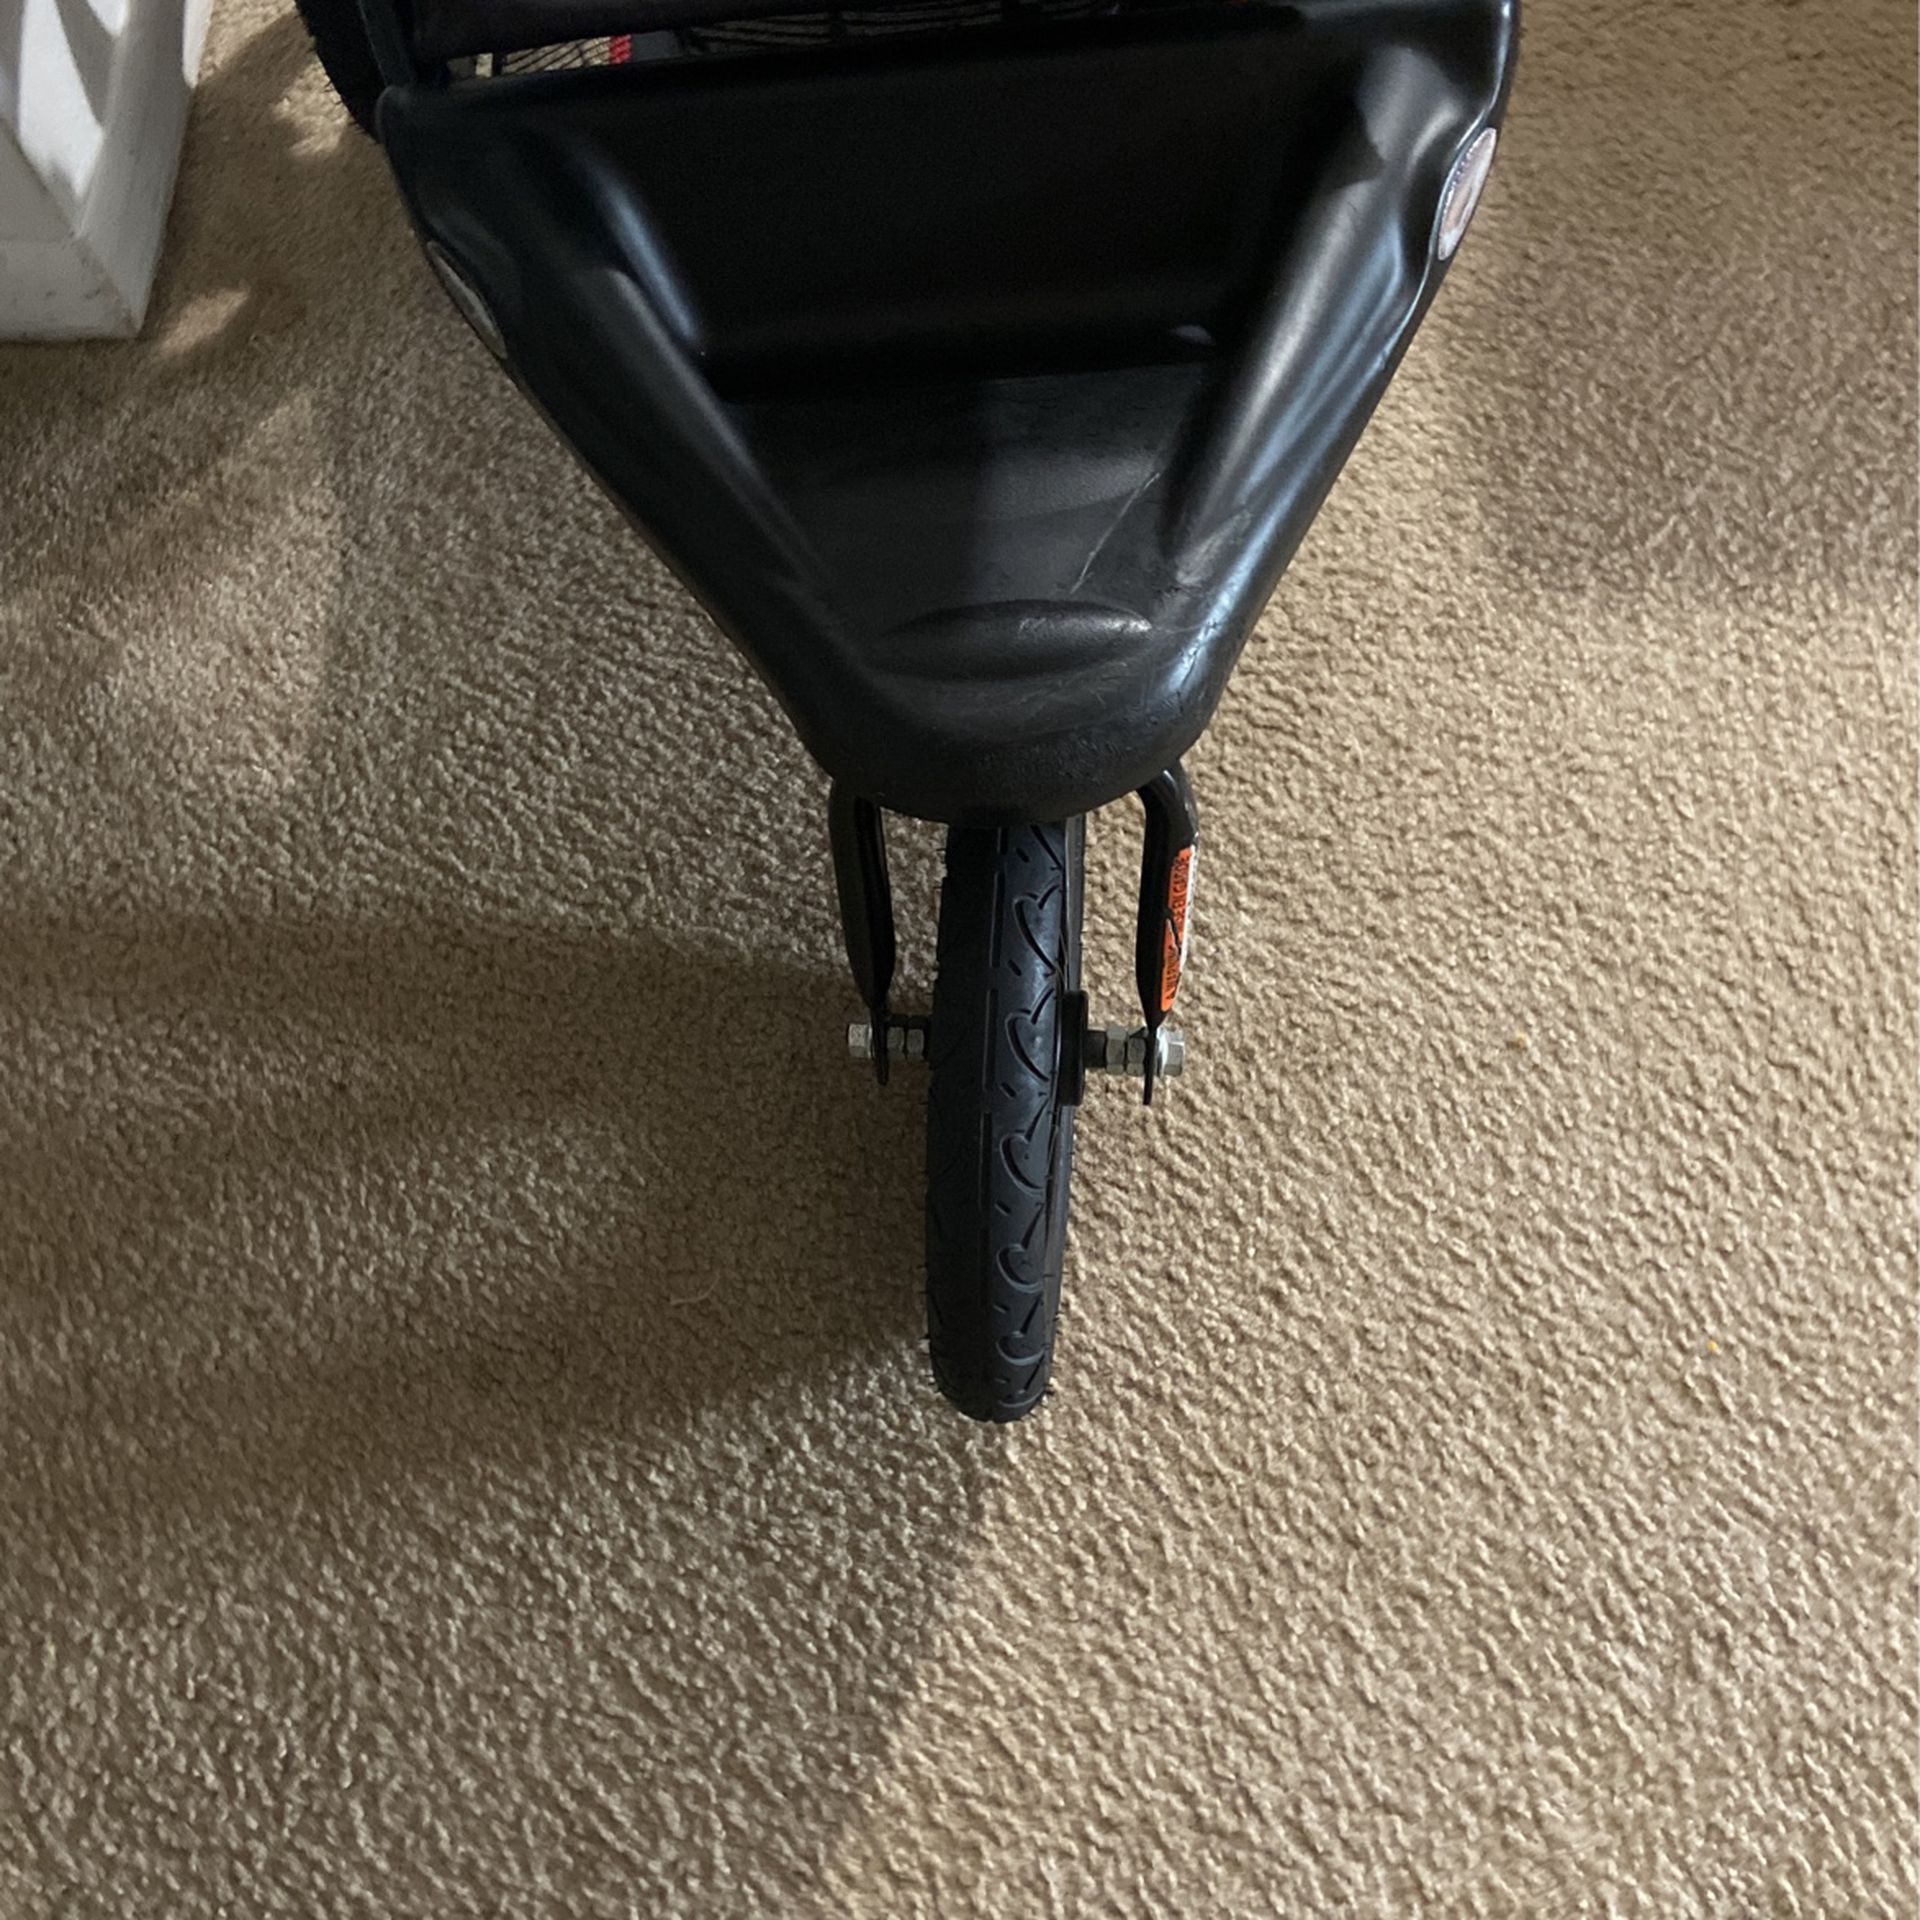 Baby stroller in very good condition